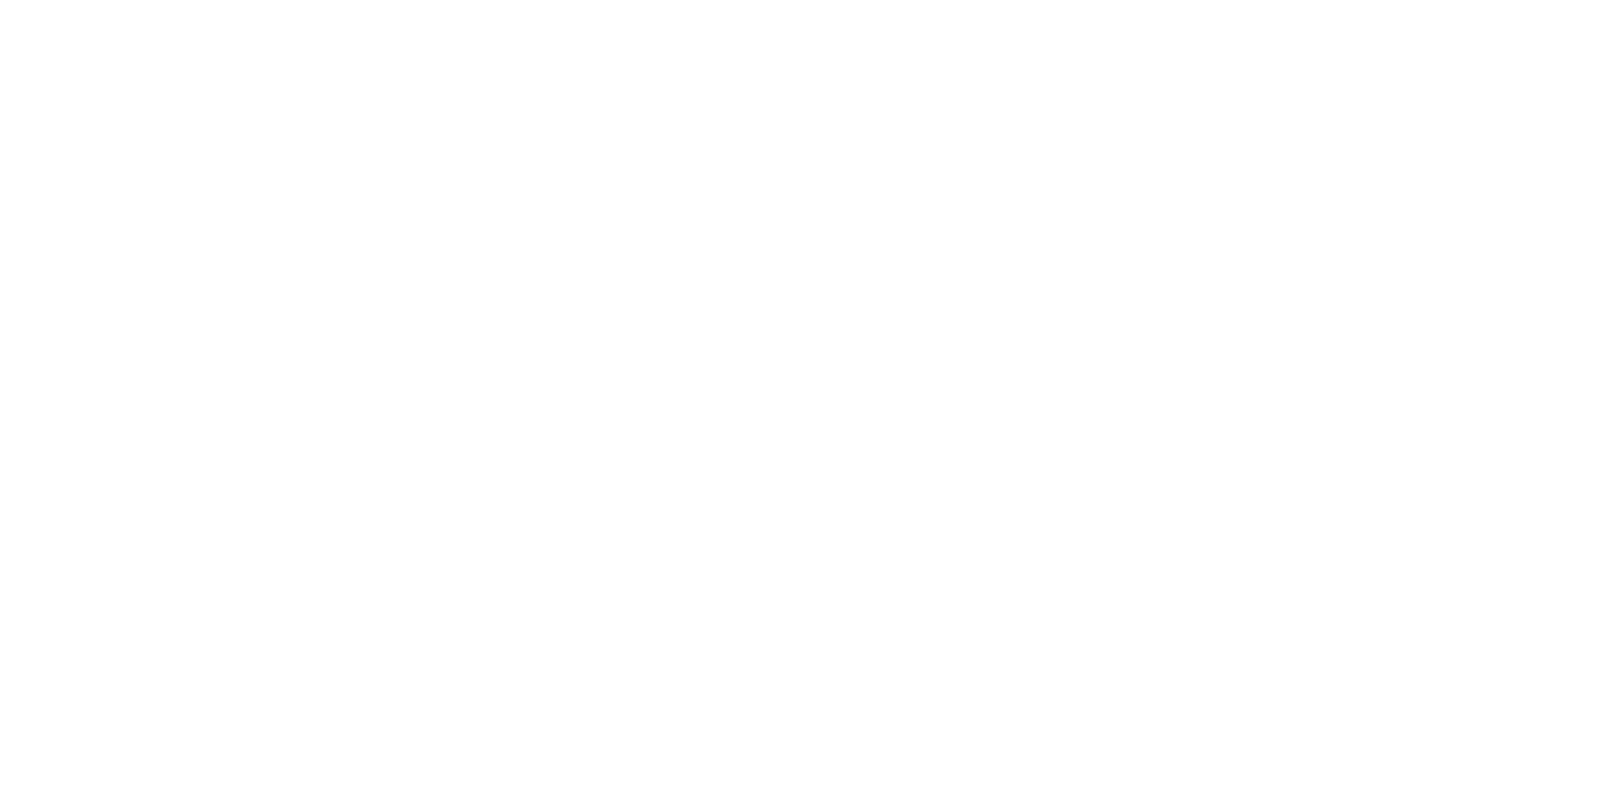 St. Charles County Estate Planning Lawyer | Polaris Law Group